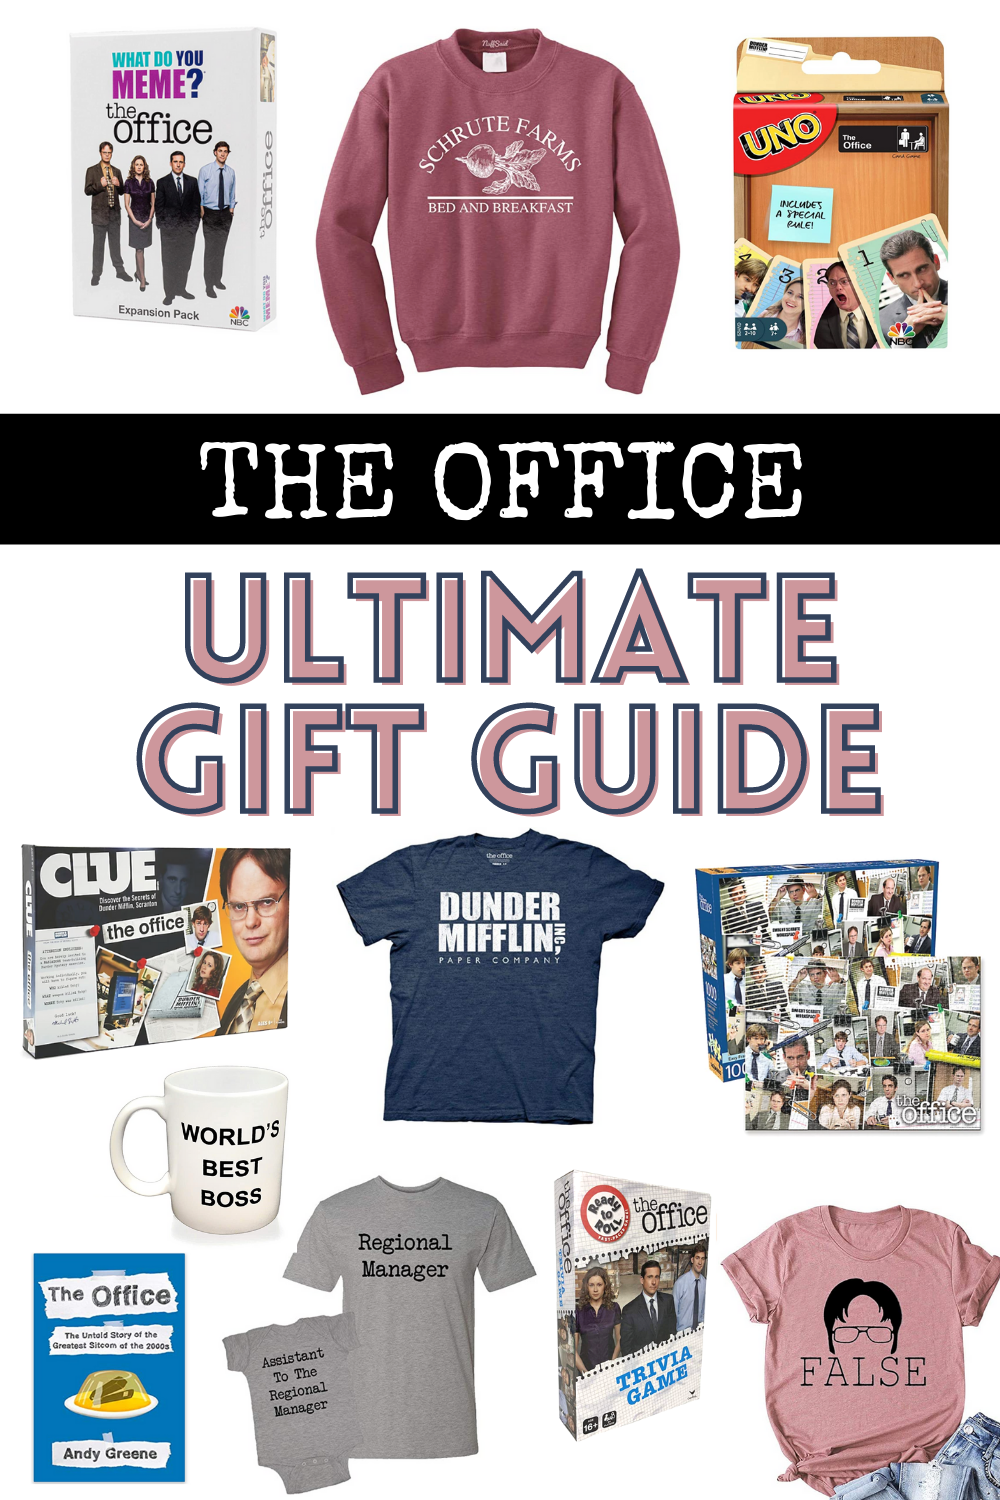 The Office Ultimate Gift Guide